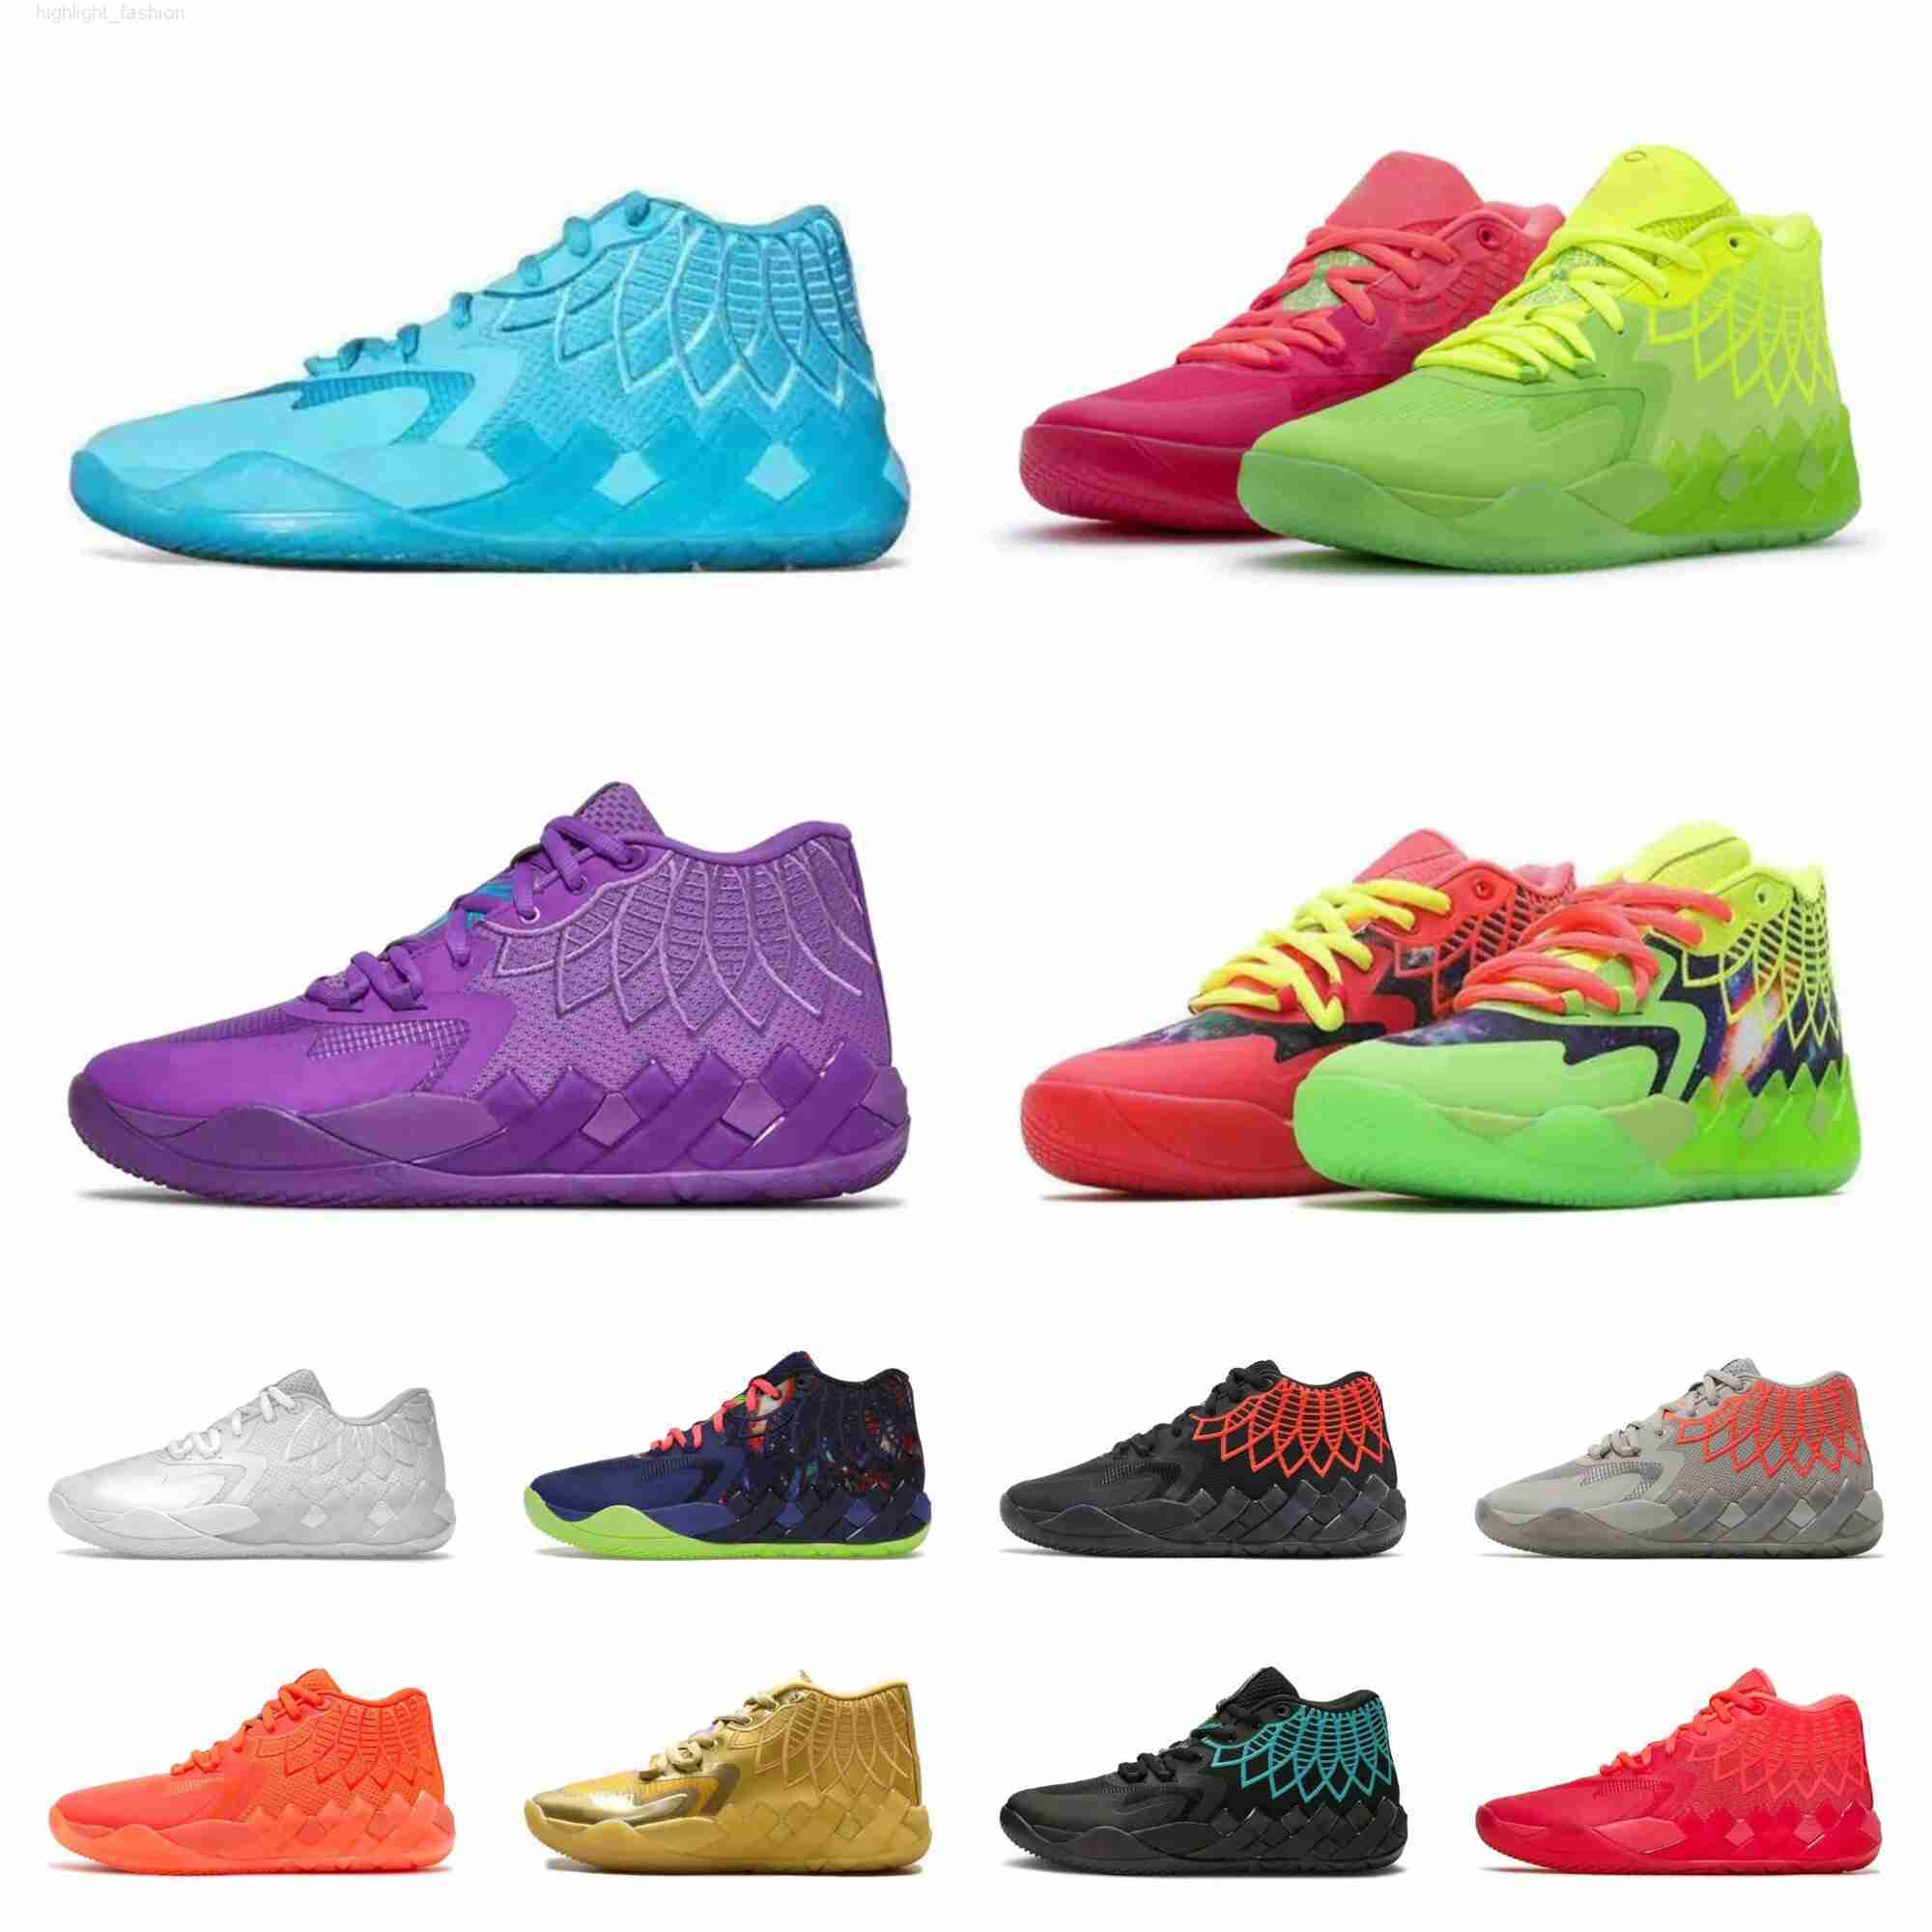 

Top LaMelo Ball 1 MB.01 Men Basketball Shoes Sneaker Black Blast Buzz City LO UFO Not From Here Queen City Rick and Morty Rock Ridge Red Mens Trainers Sports Sneakers 39-46, Y009